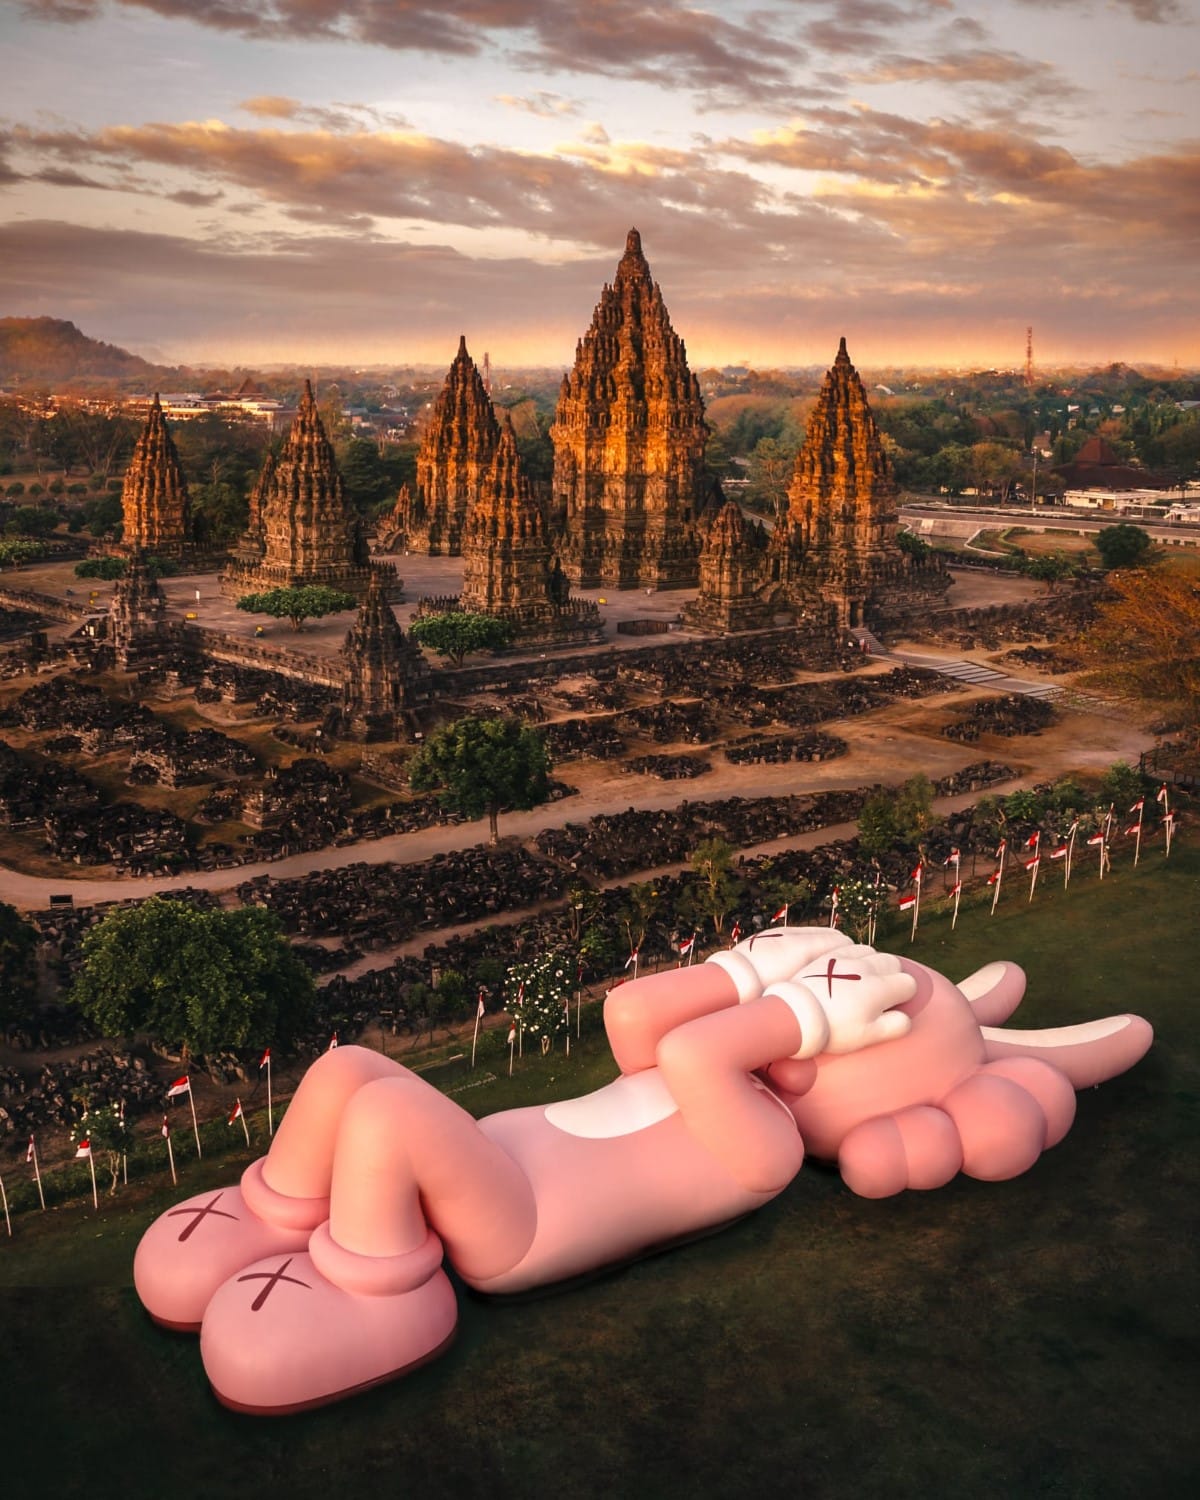 150-Foot Sculpture of a Pink Rabbit Lies Down in Front of Indonesia`s Prambanan Temple